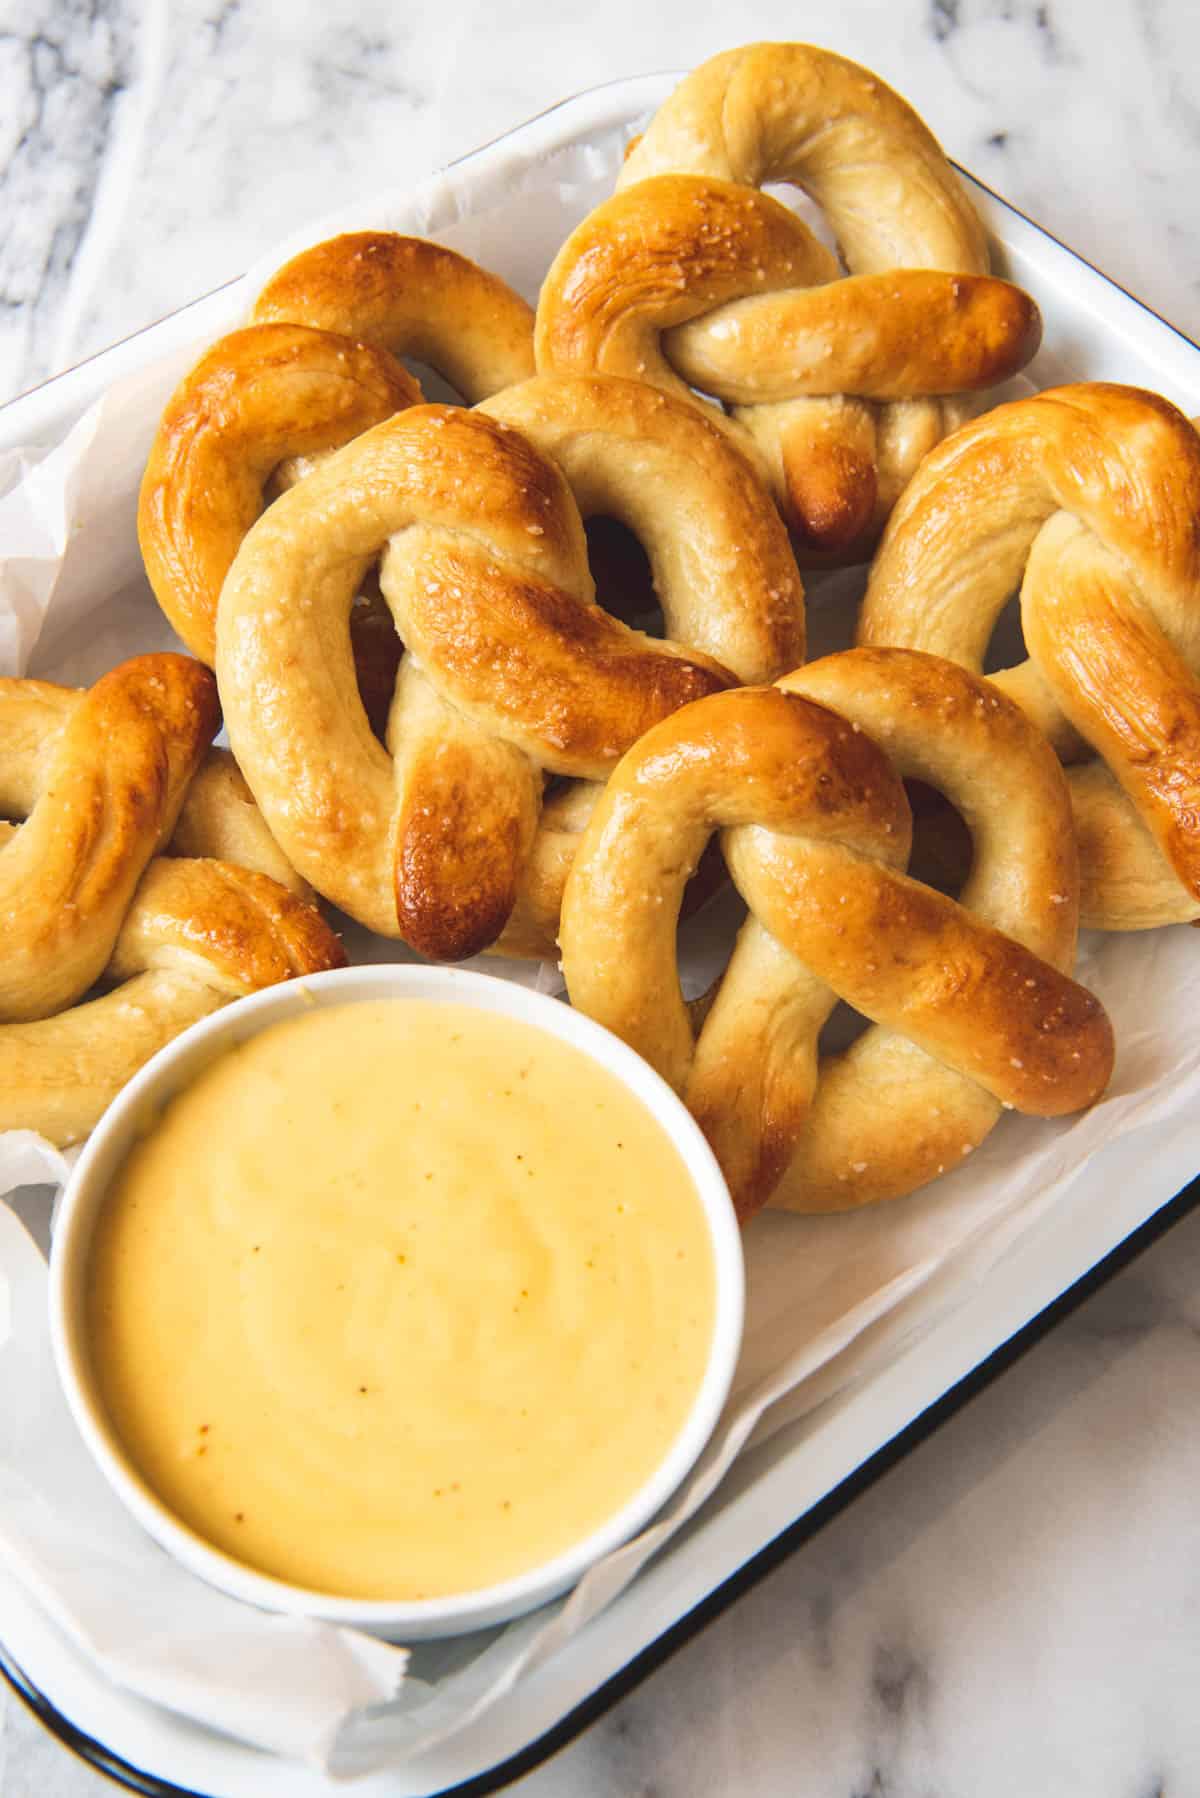 An image of a bowl of easy homemade cheese dipping sauce with warm soft pretzels.